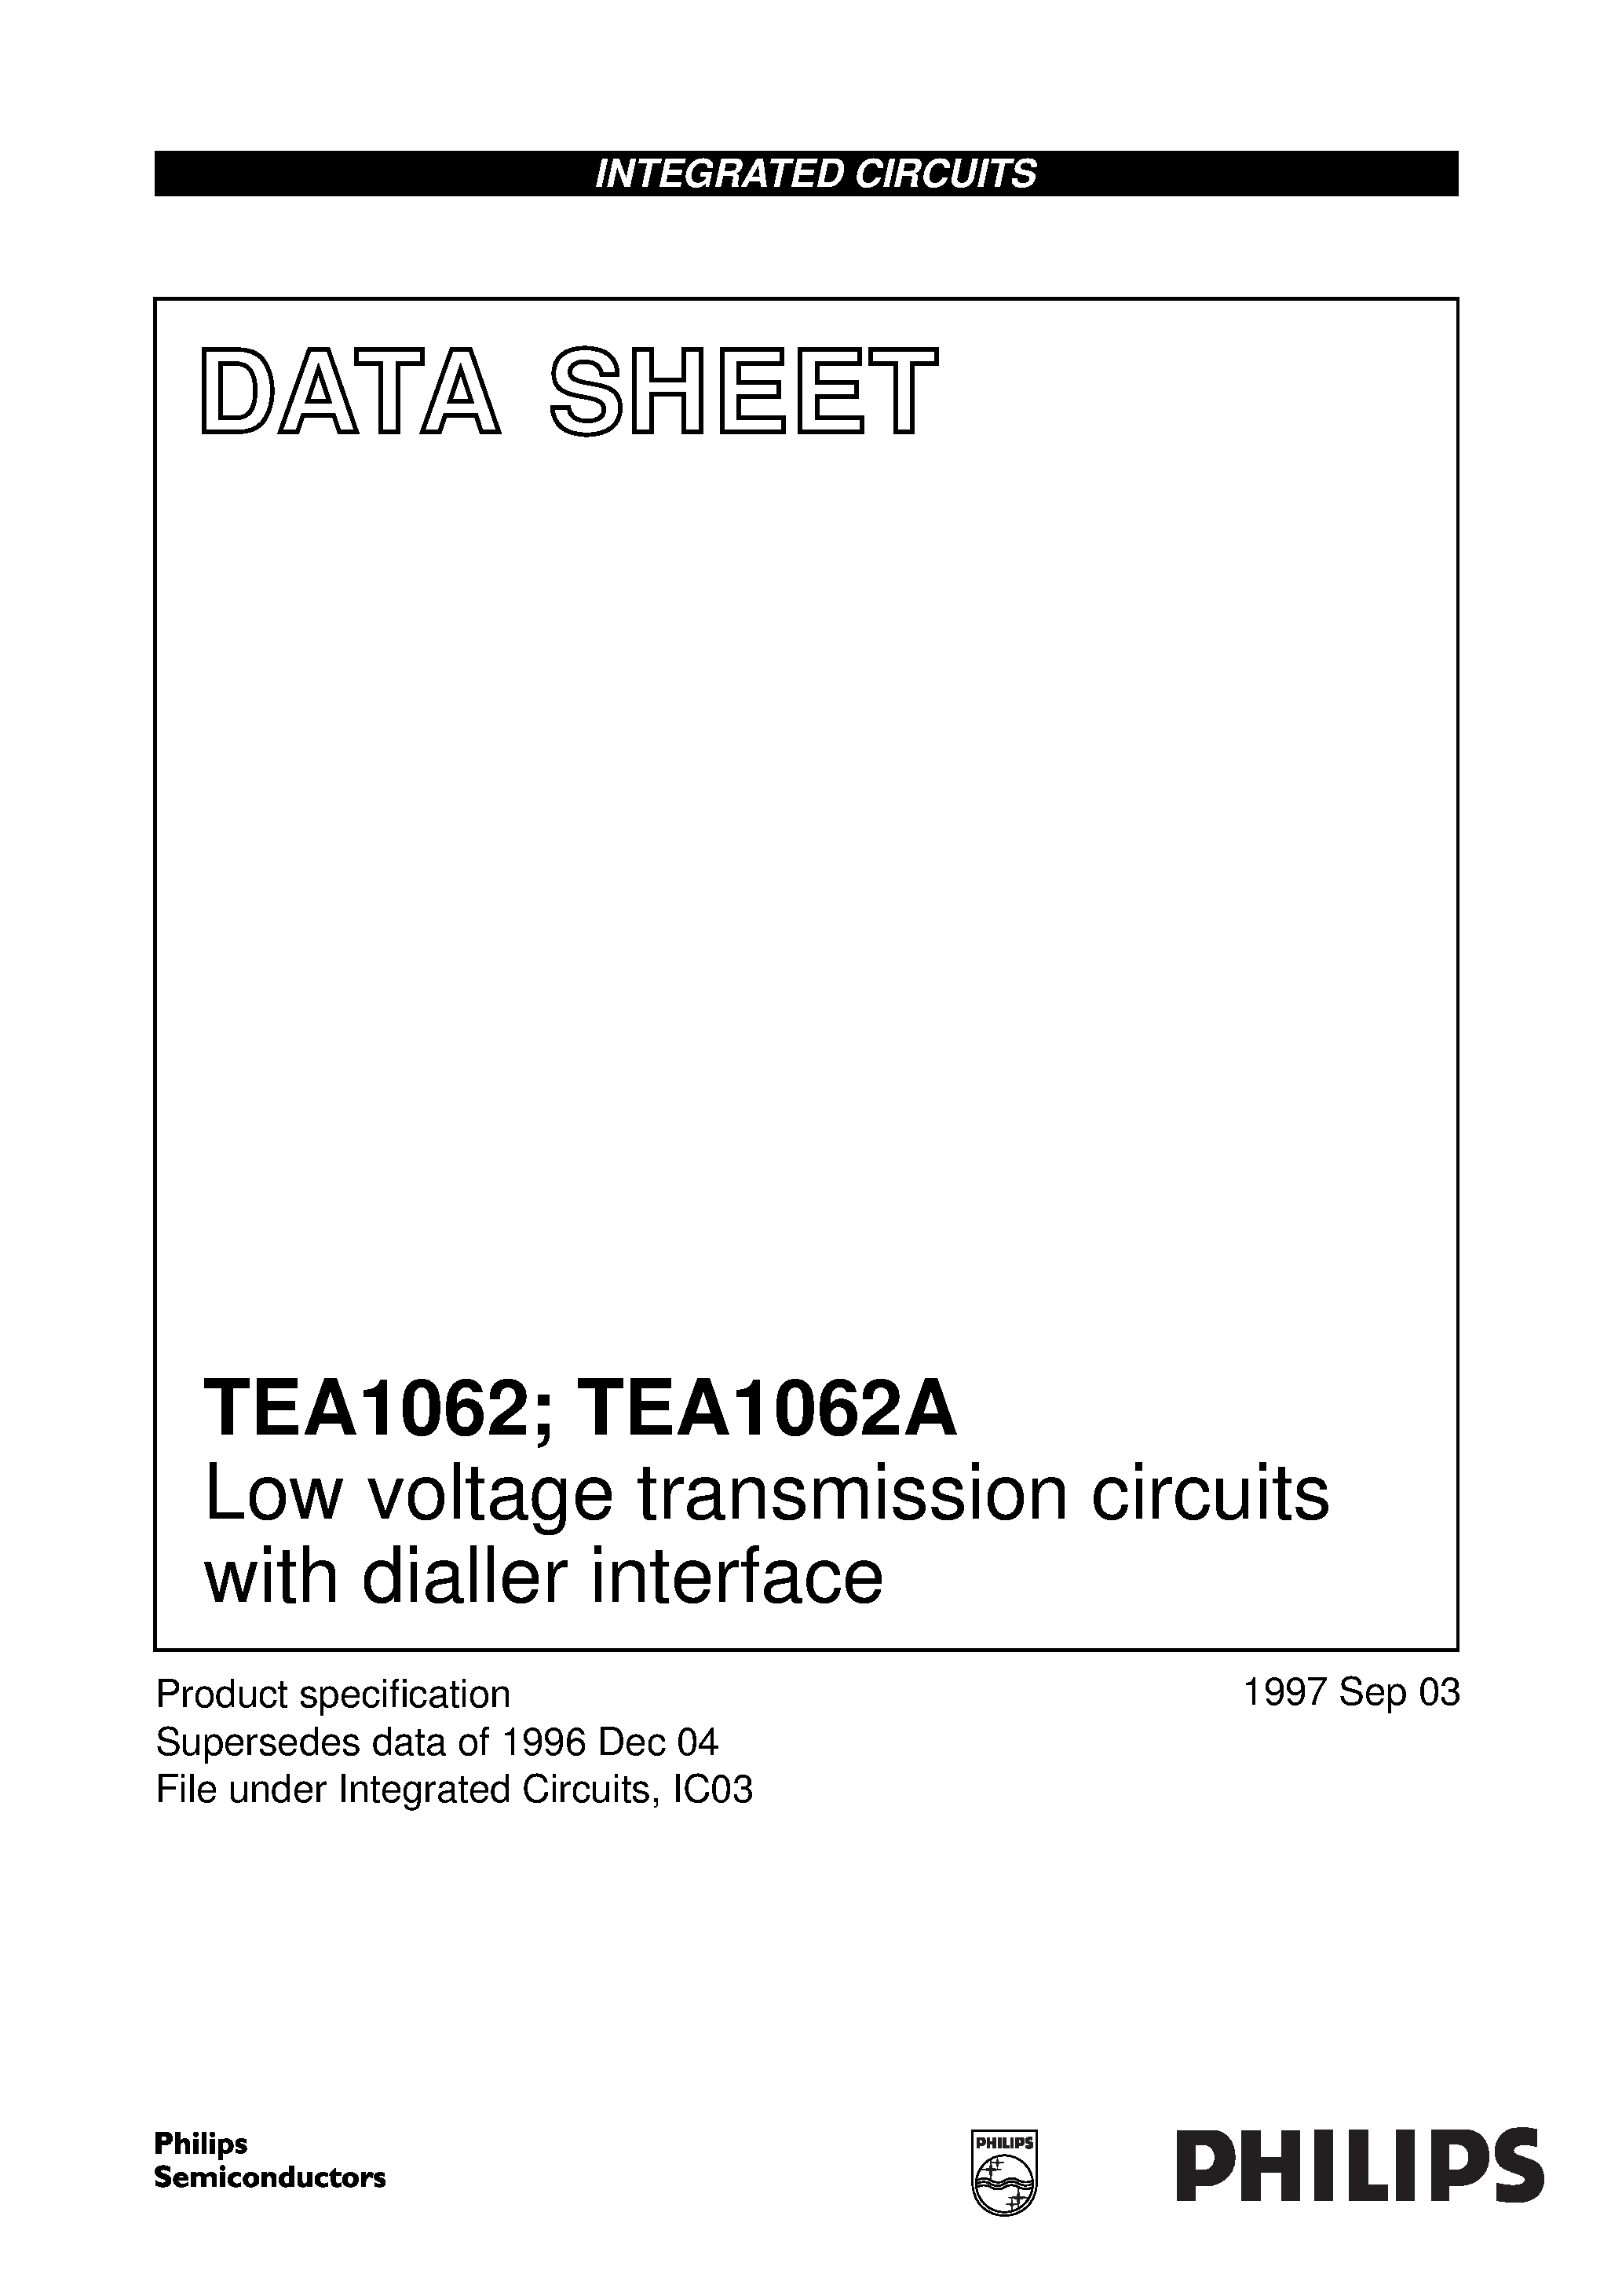 Datasheet TEA1062A - Low voltage transmission circuits with dialler interface page 1